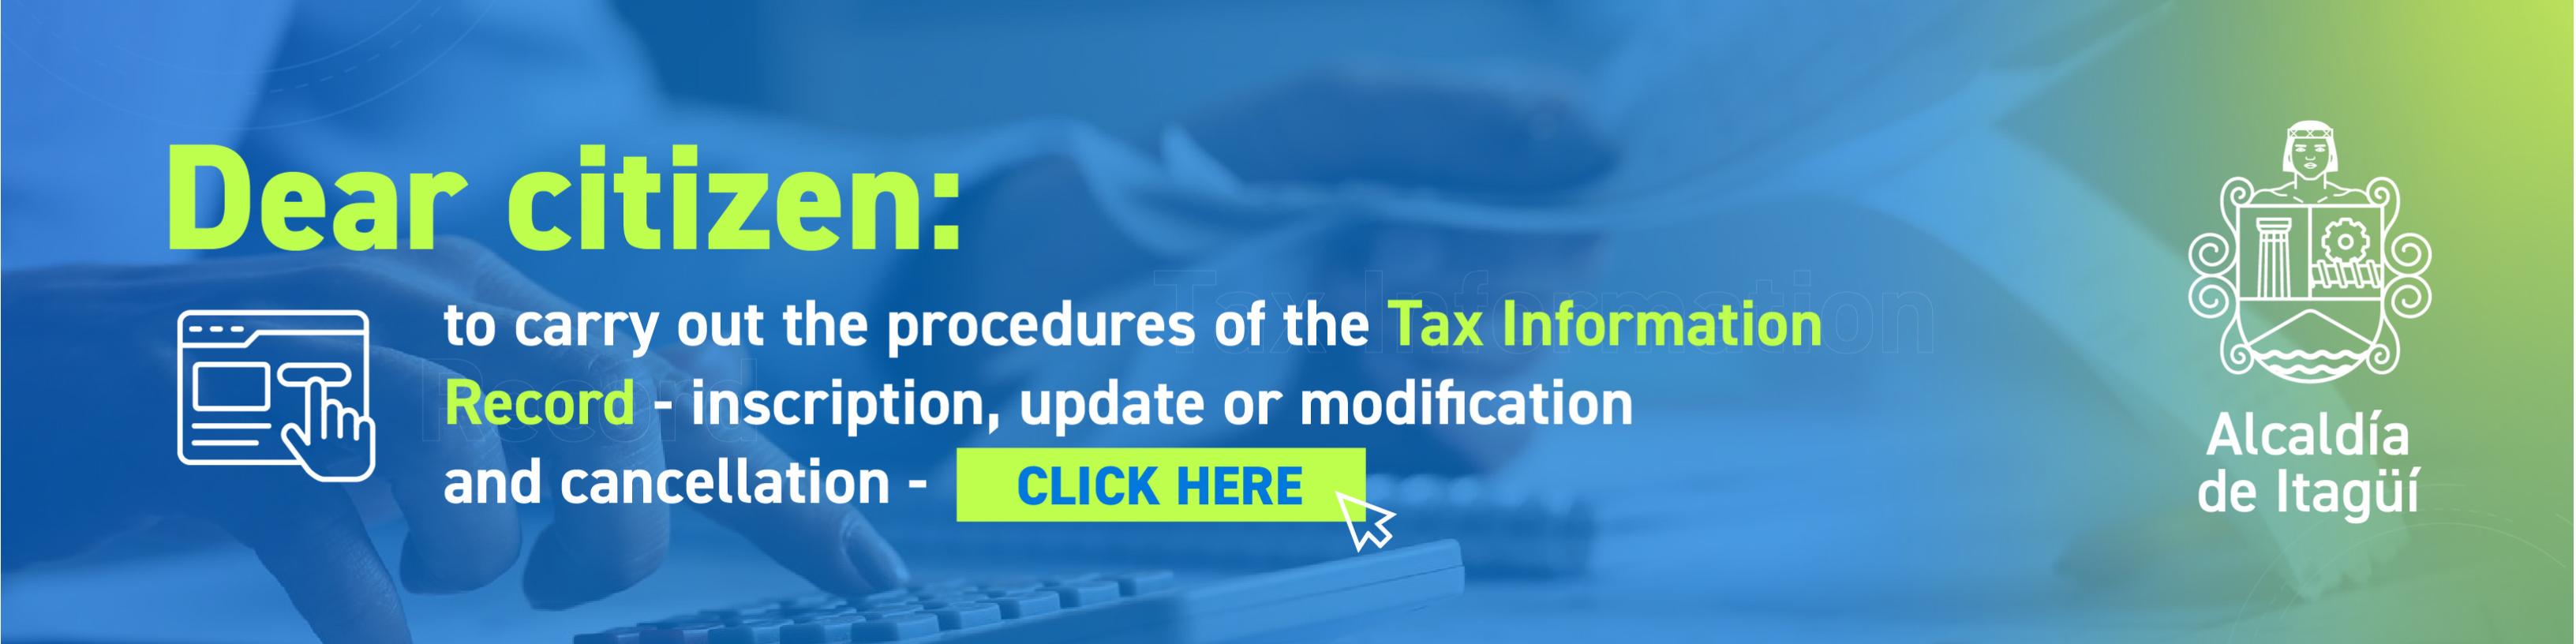 Mr. User:
To carry out the procedures for the Tax Information Registry (RIT) - registration, update or modification, cancellation, and cancellation - CLICK HERE
Town hall
from Itagui